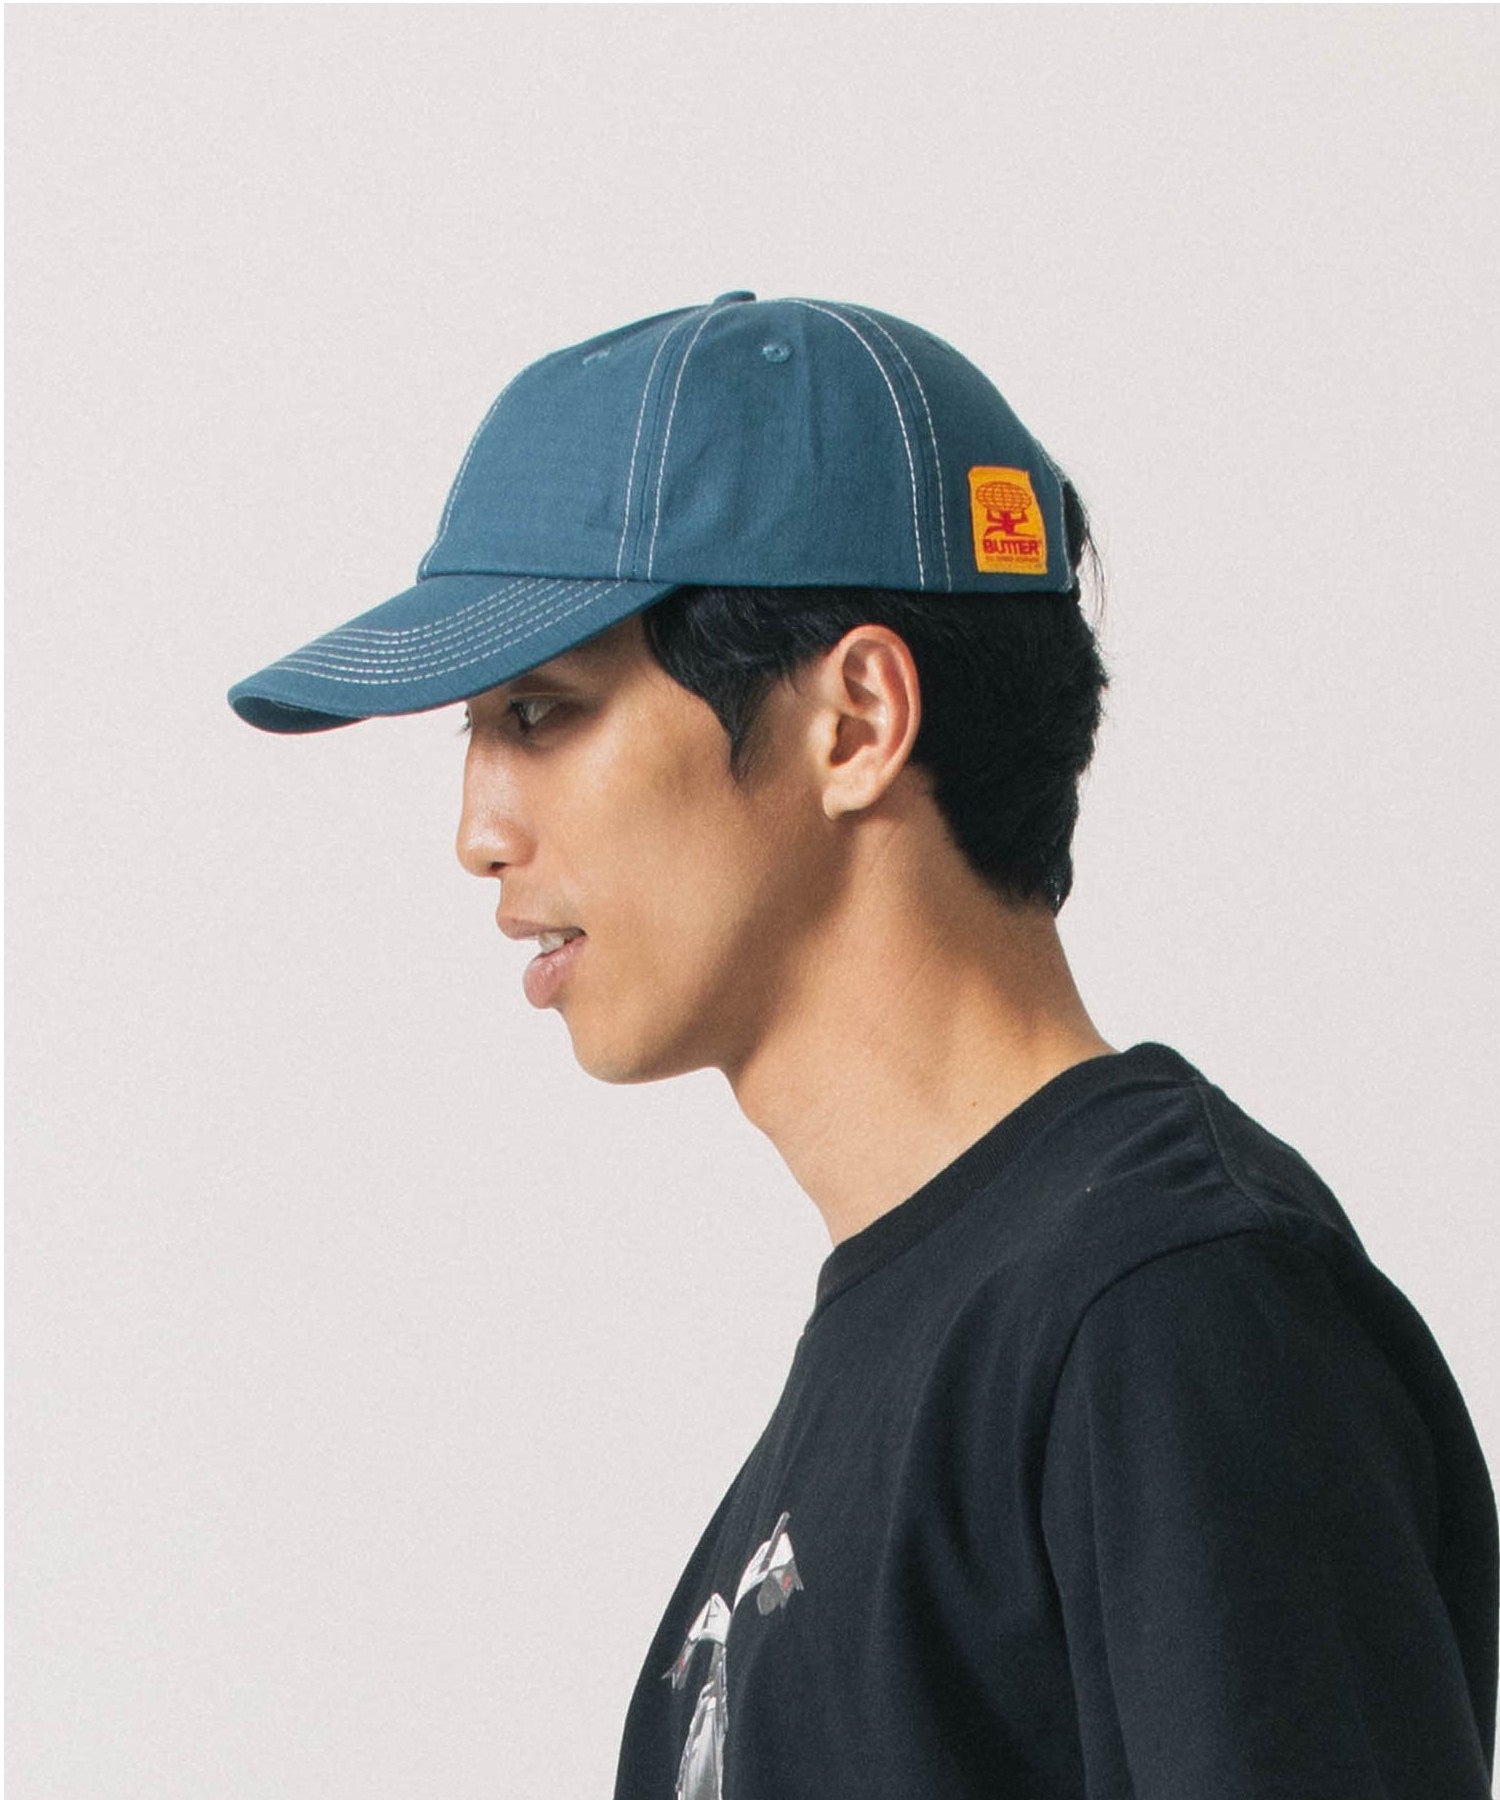 BUTTER/バター/Washed Ripstop 6 Panel Cap